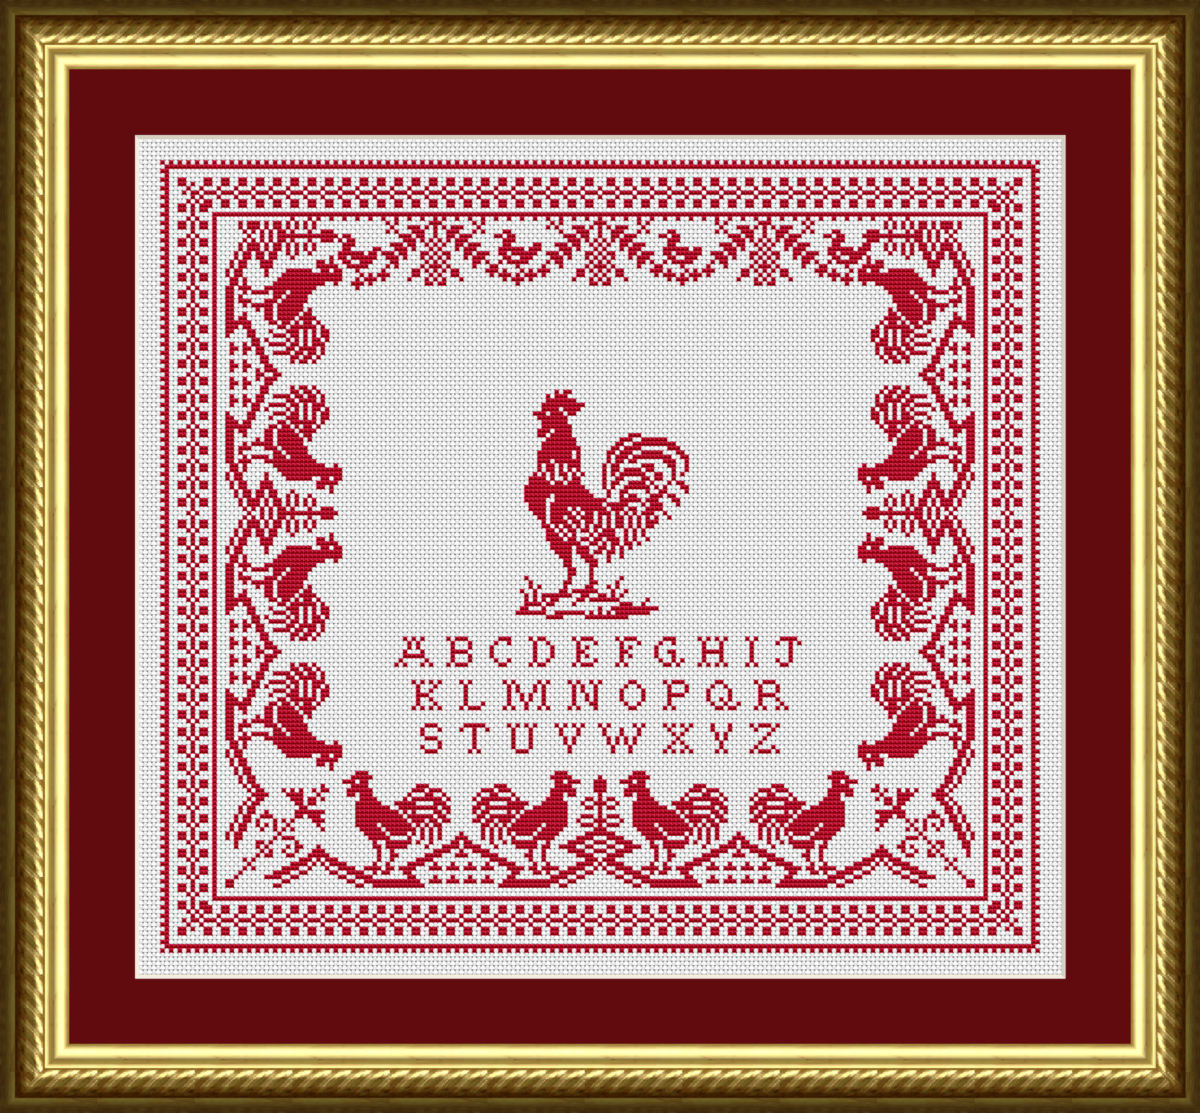 Antique Red Rooster Cross Stitch Pattern 1019